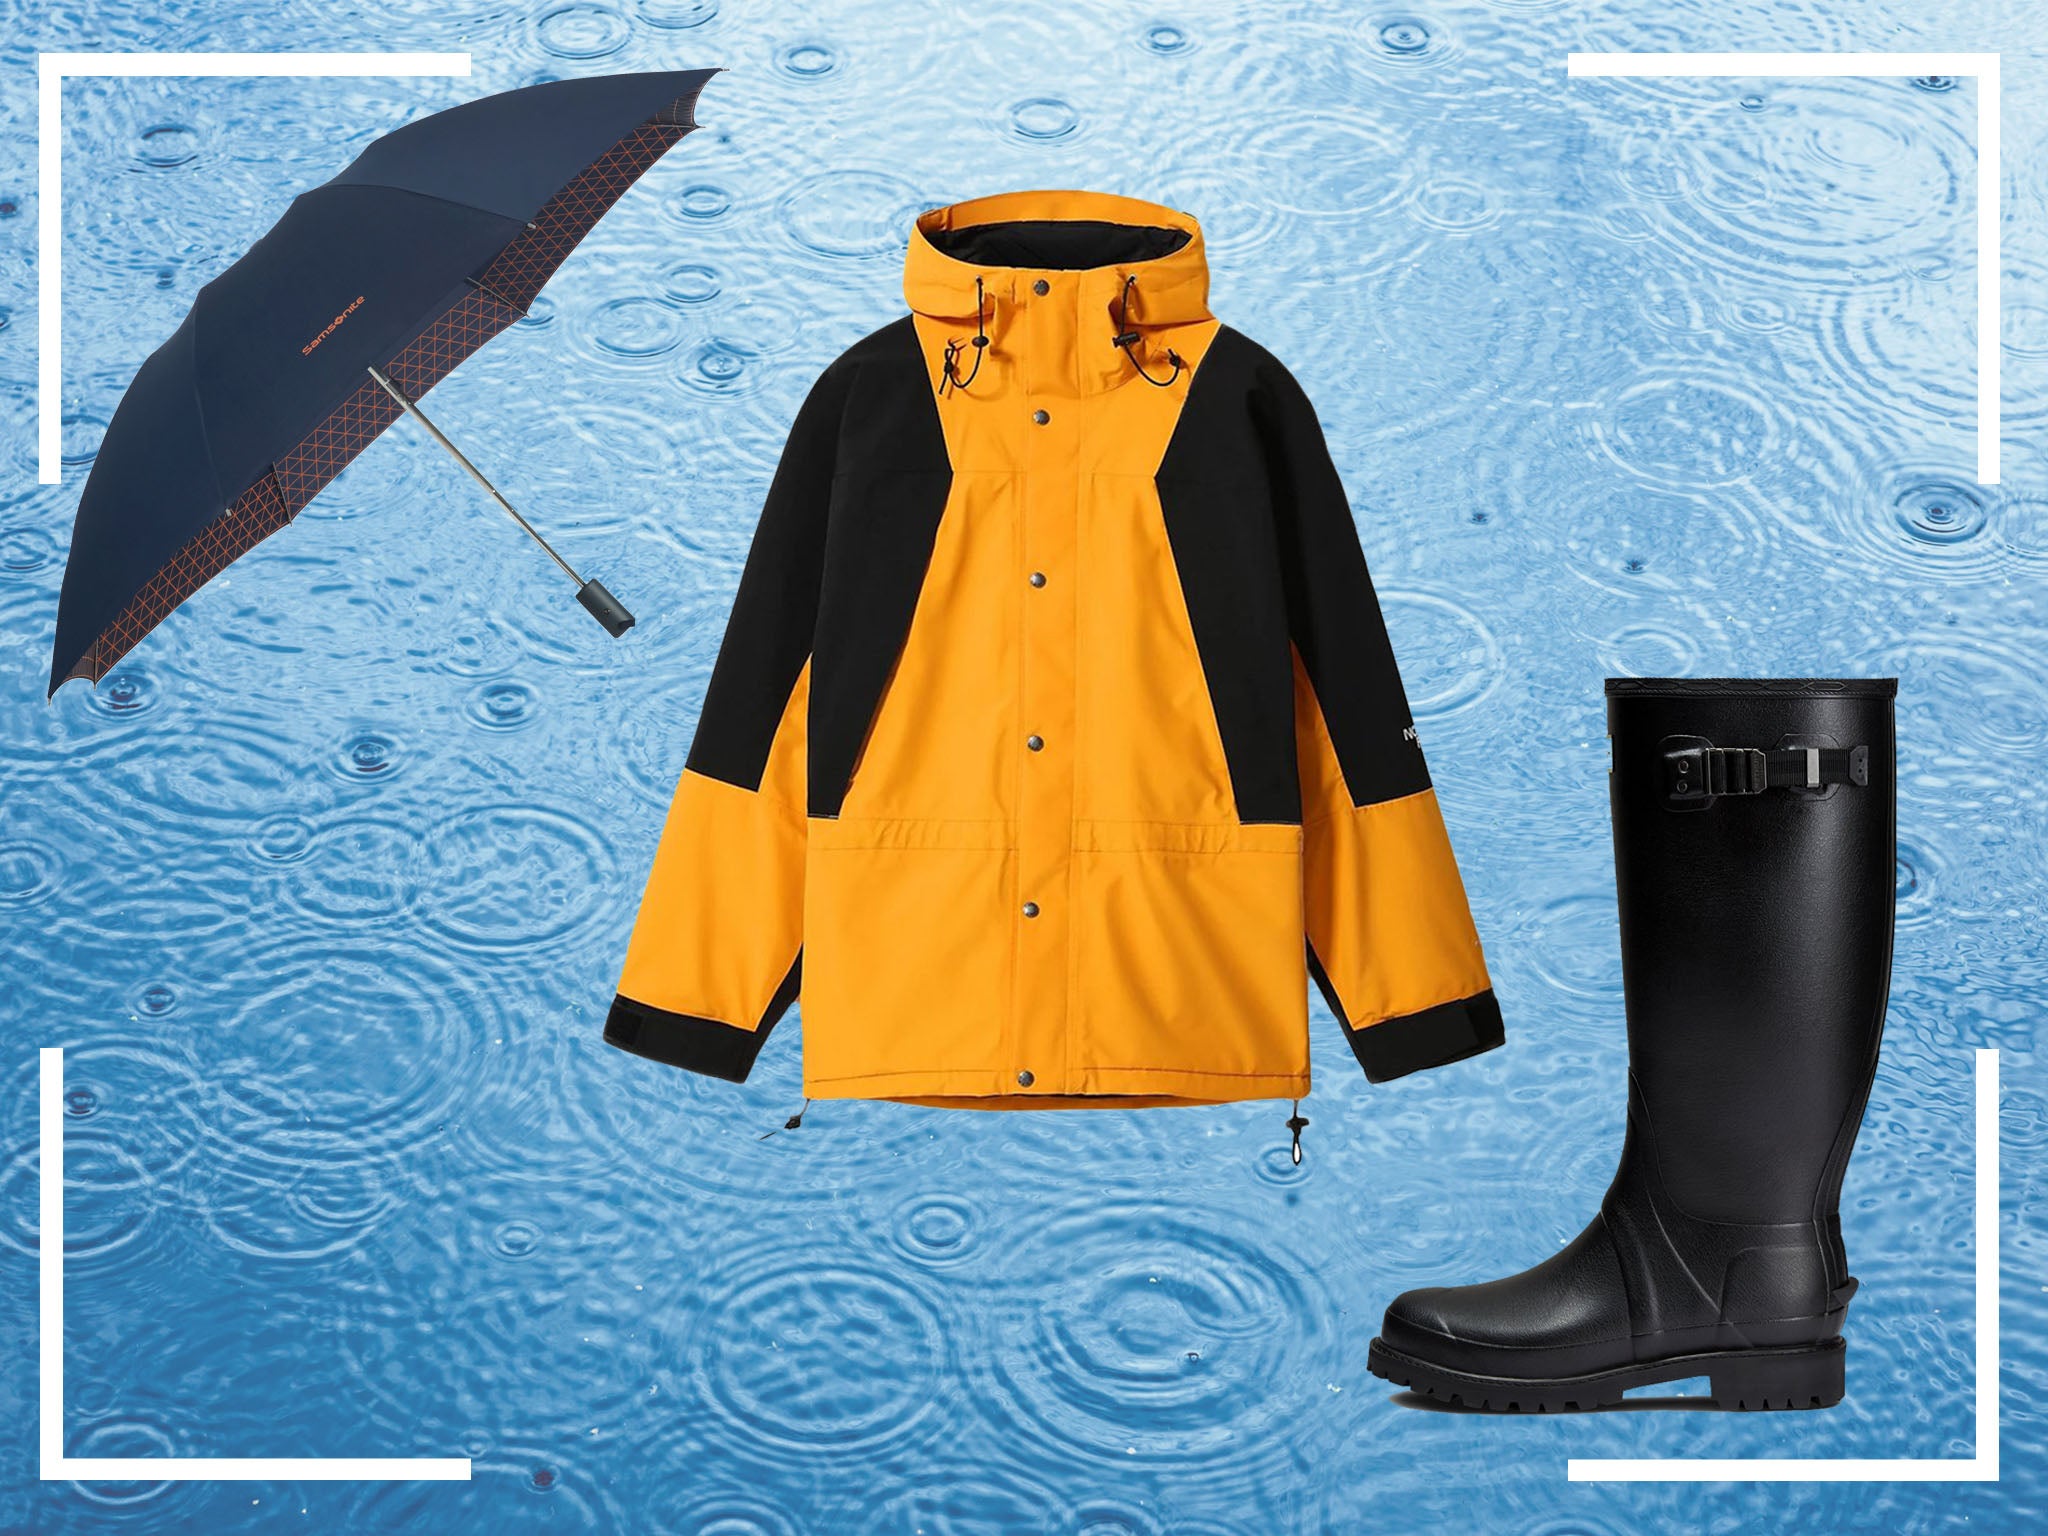 Stay dry and warm with GORE-TEX